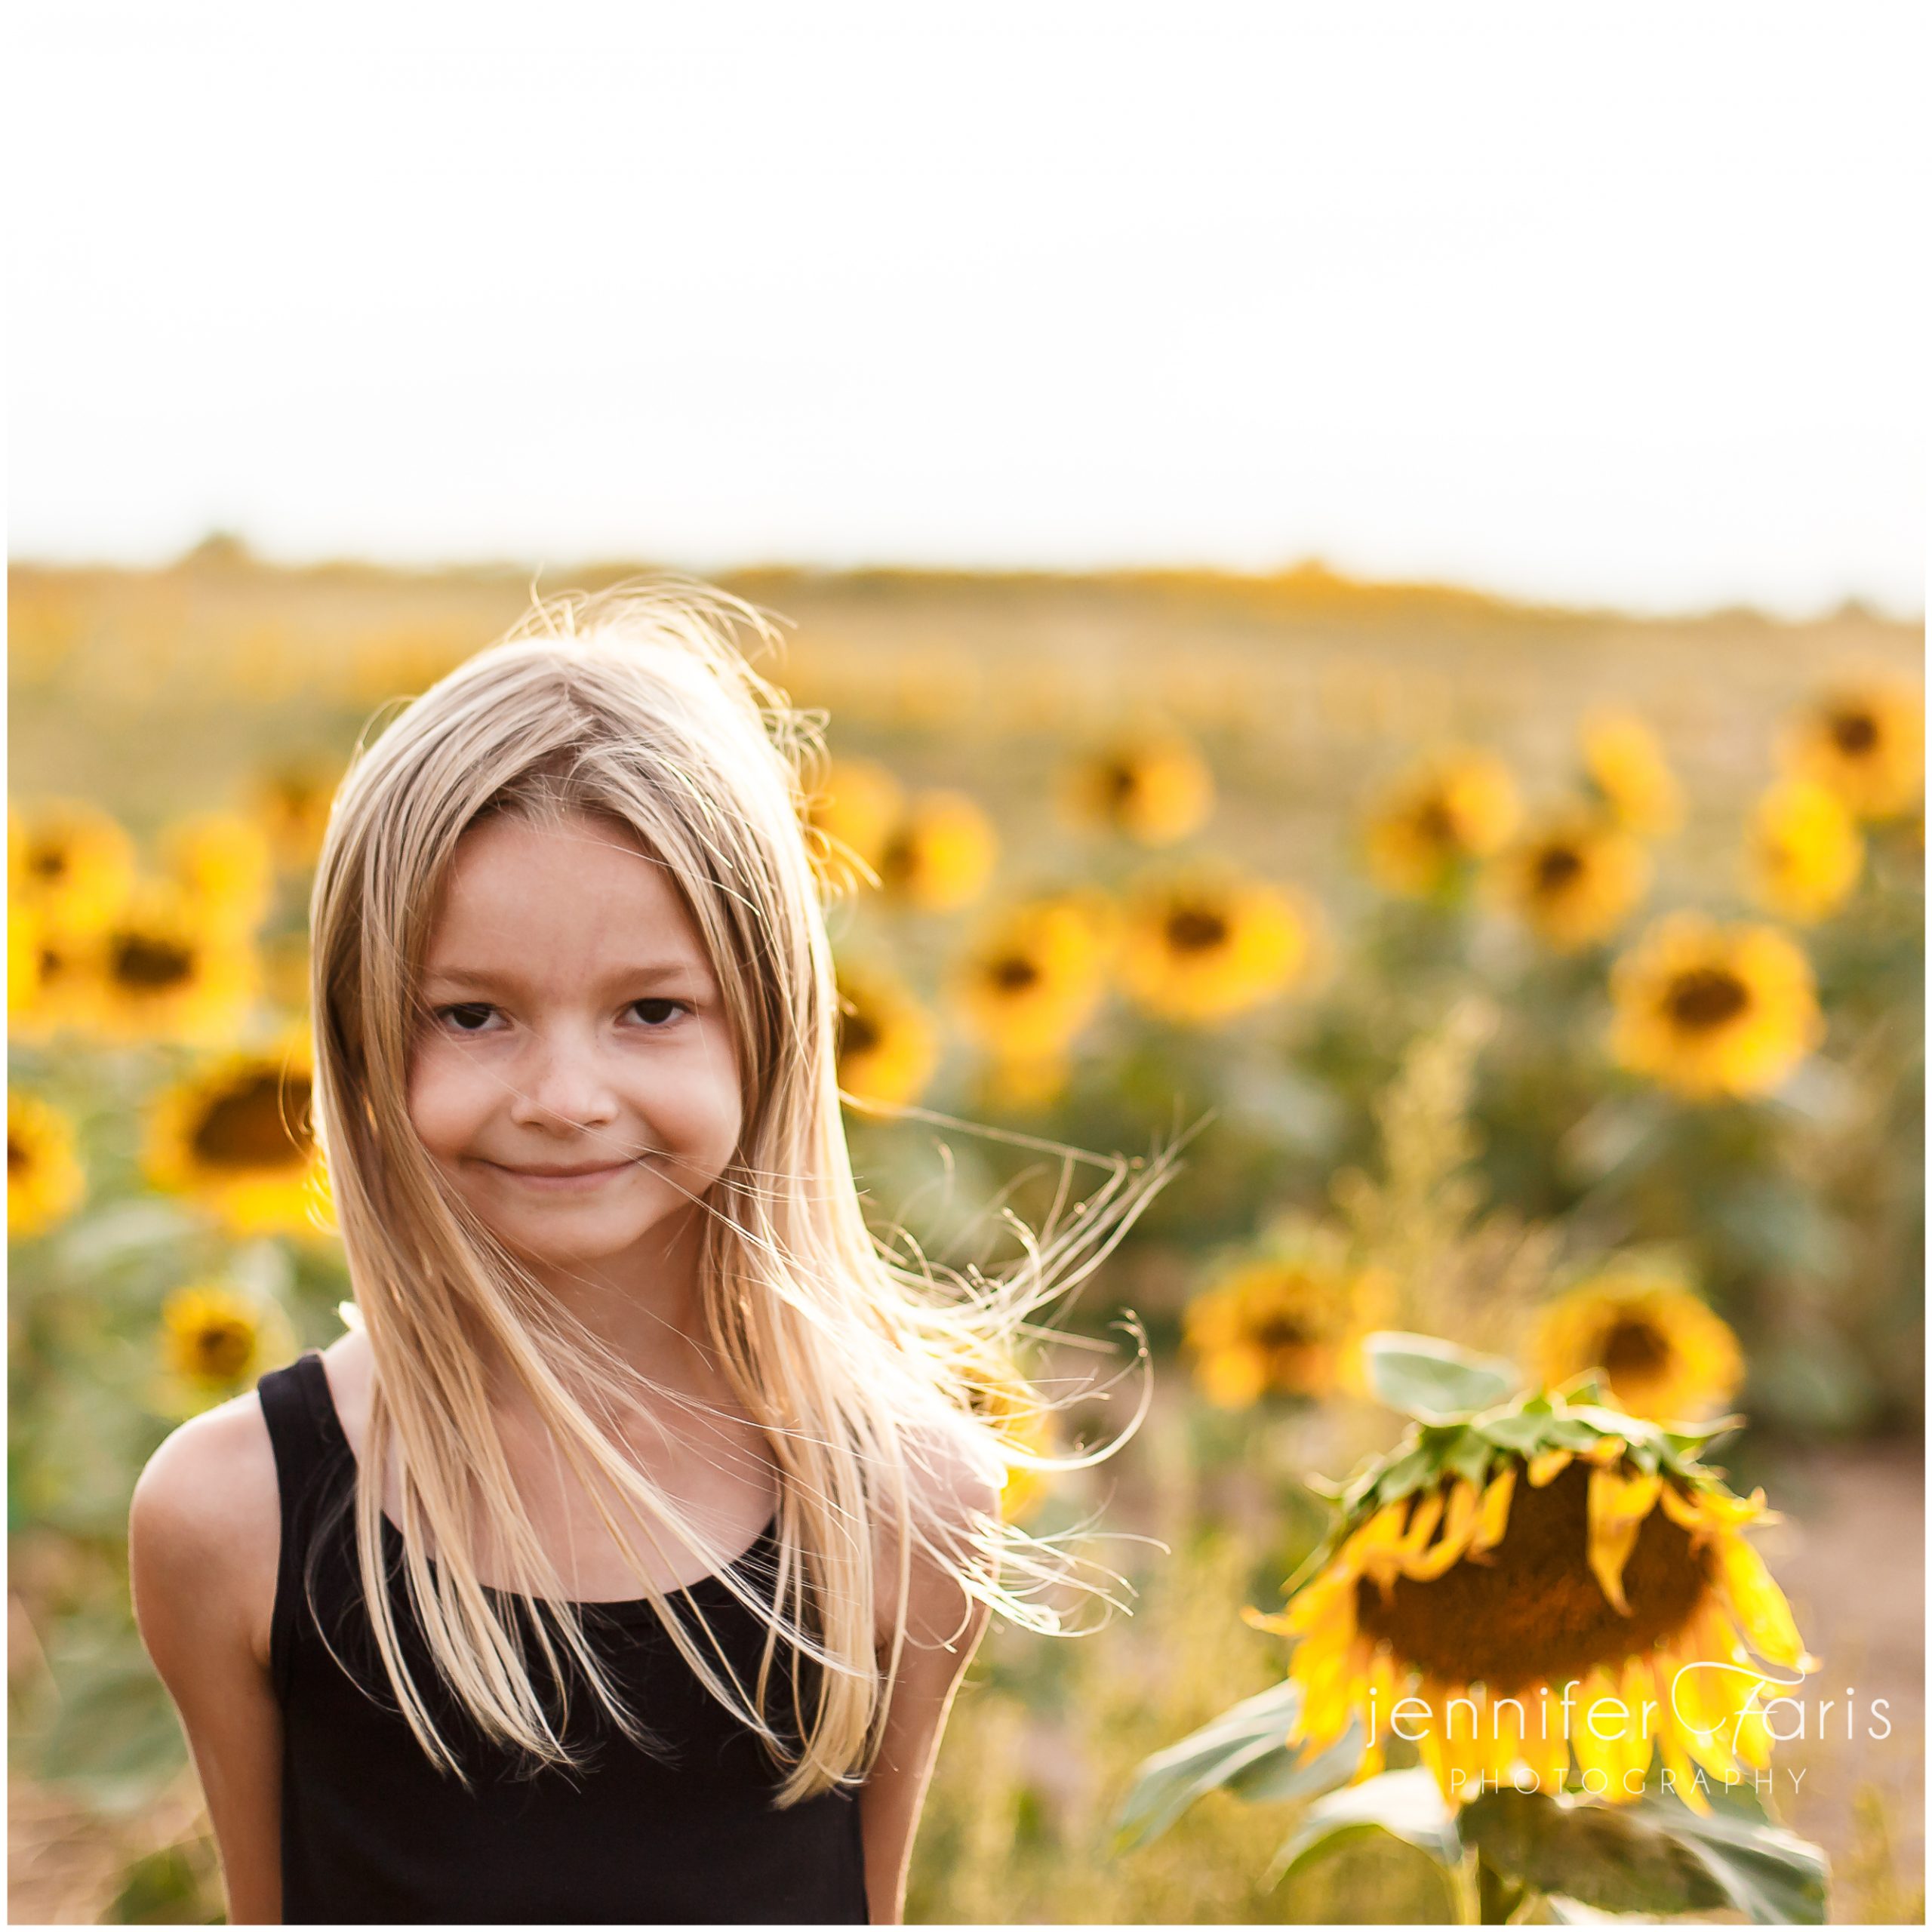 5 Reasons to do an End of Summer Photo Shoot